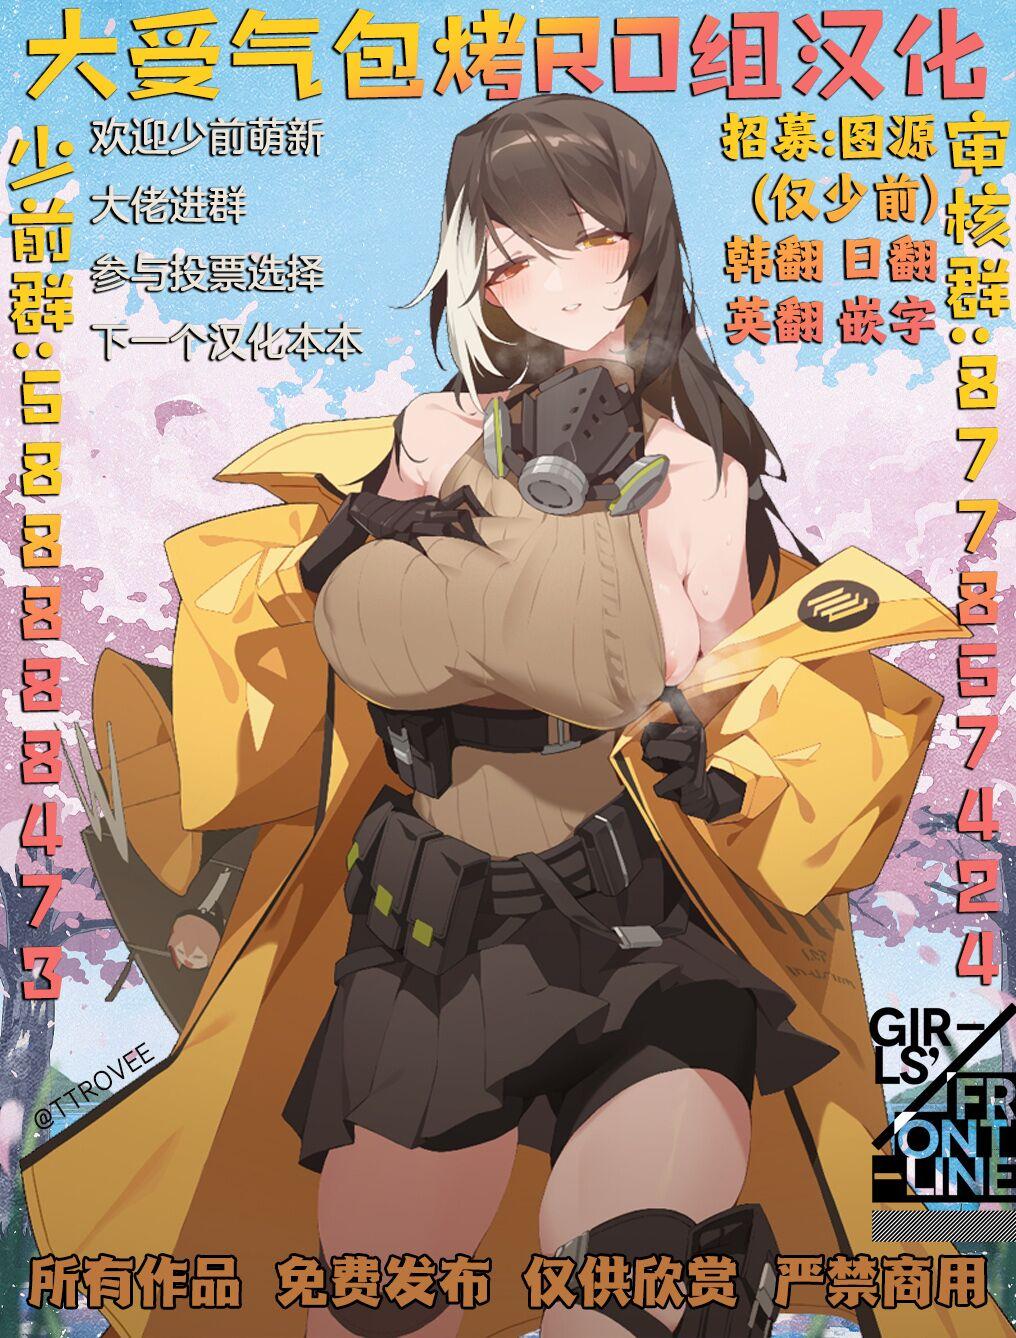 Pussylick AK15の進捗1 - Girls frontline Girl - Page 11